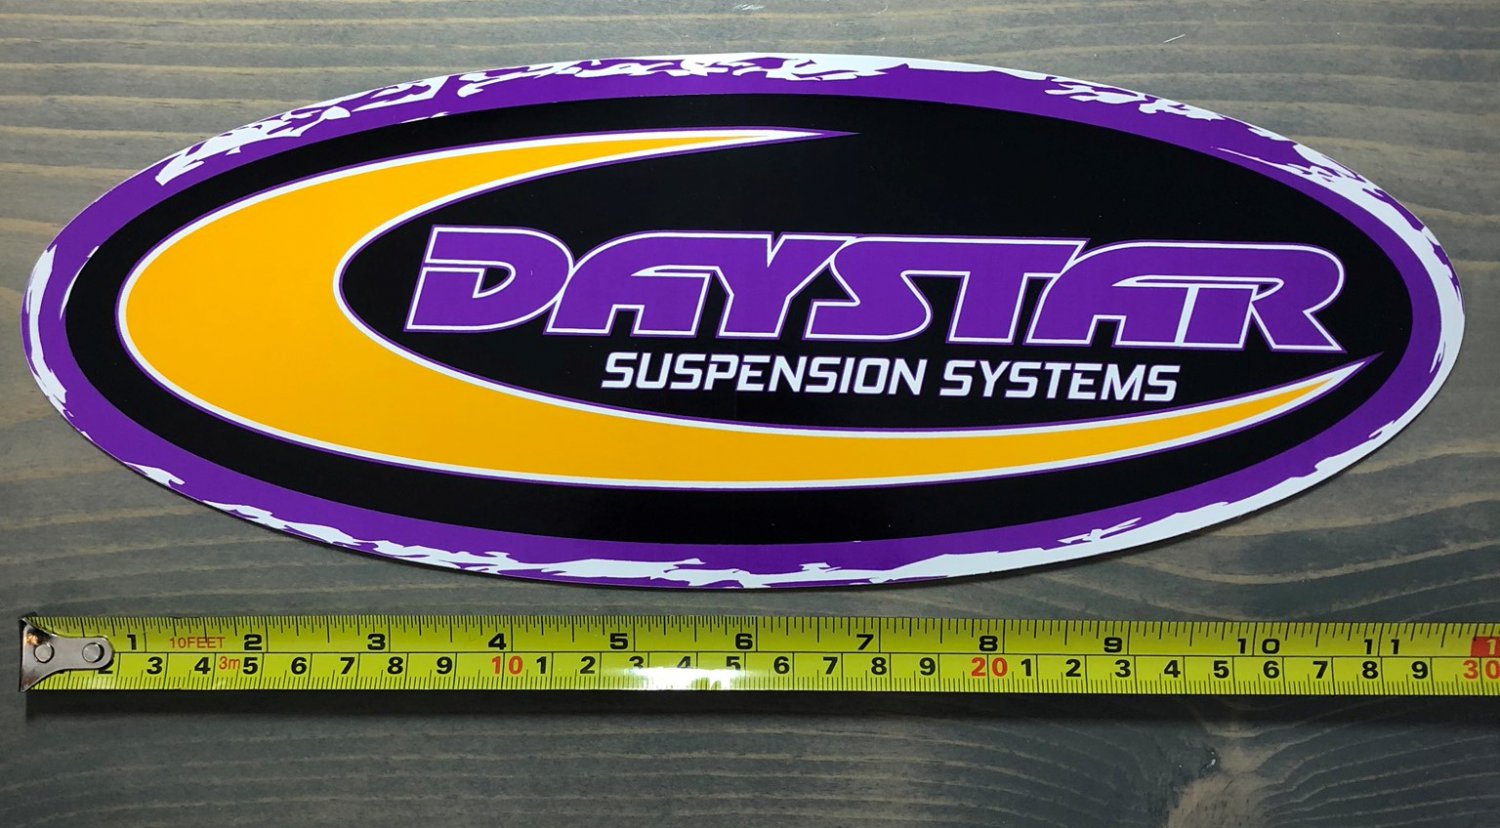 11 Daystar Suspension System Sticker Decal Racing 4x4 Truck Racing Offroad  4 Wheel Drive